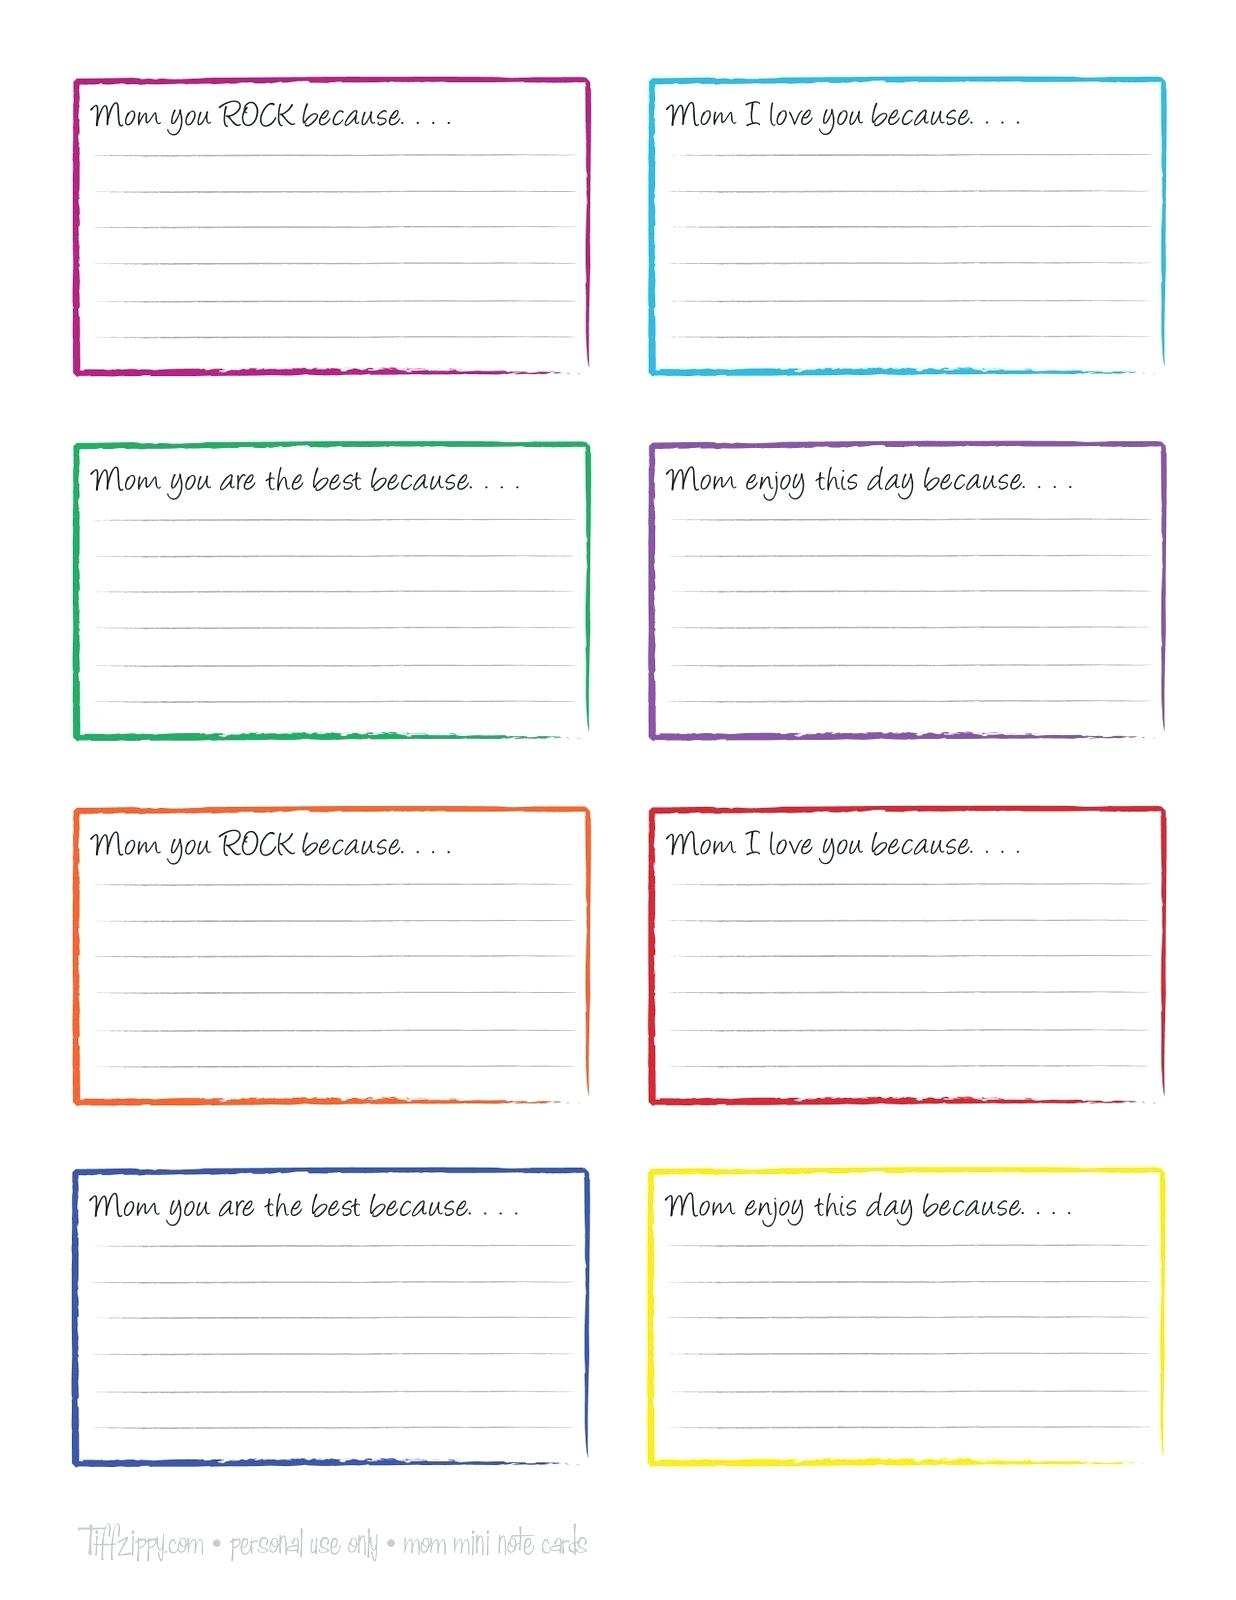 21 Format 21X21 Note Card Template For Word Now by 21X21 Note Card Within 3X5 Note Card Template For Word